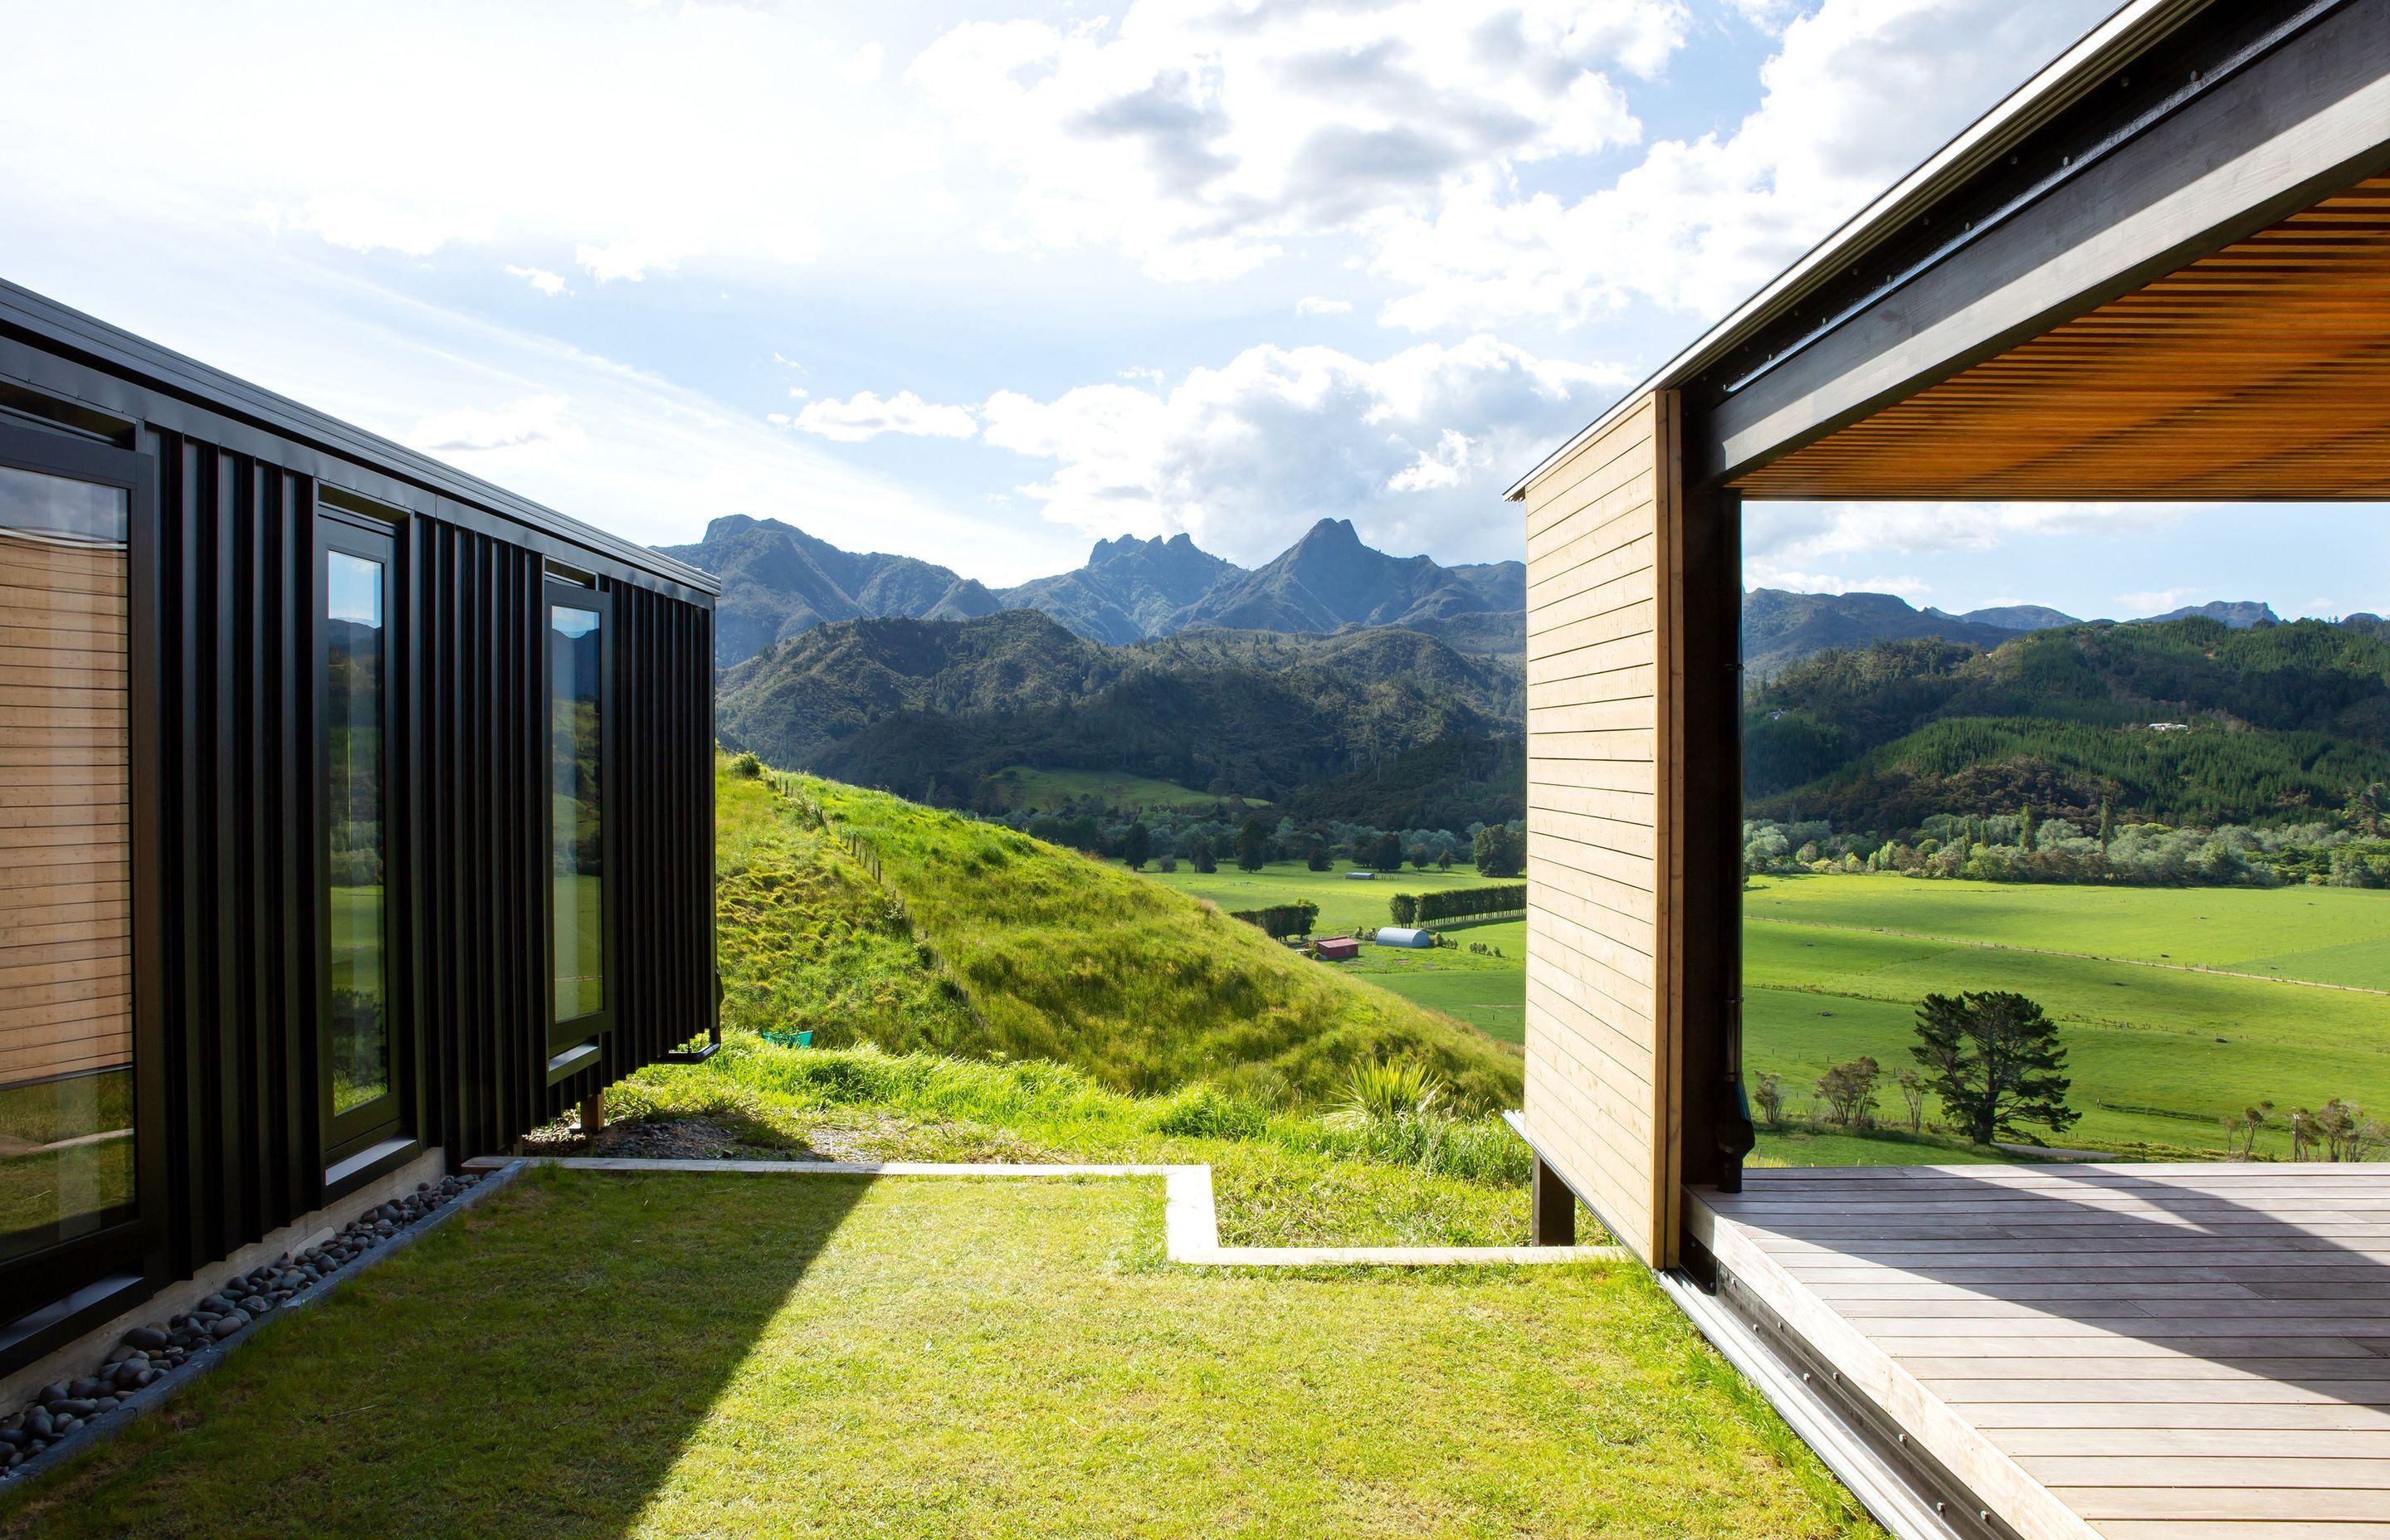 A sliding door clad in larch was envisioned as a barn-style door, designed to move across both outdoor area and lounge wall to provide a versatile level of shelter as required.